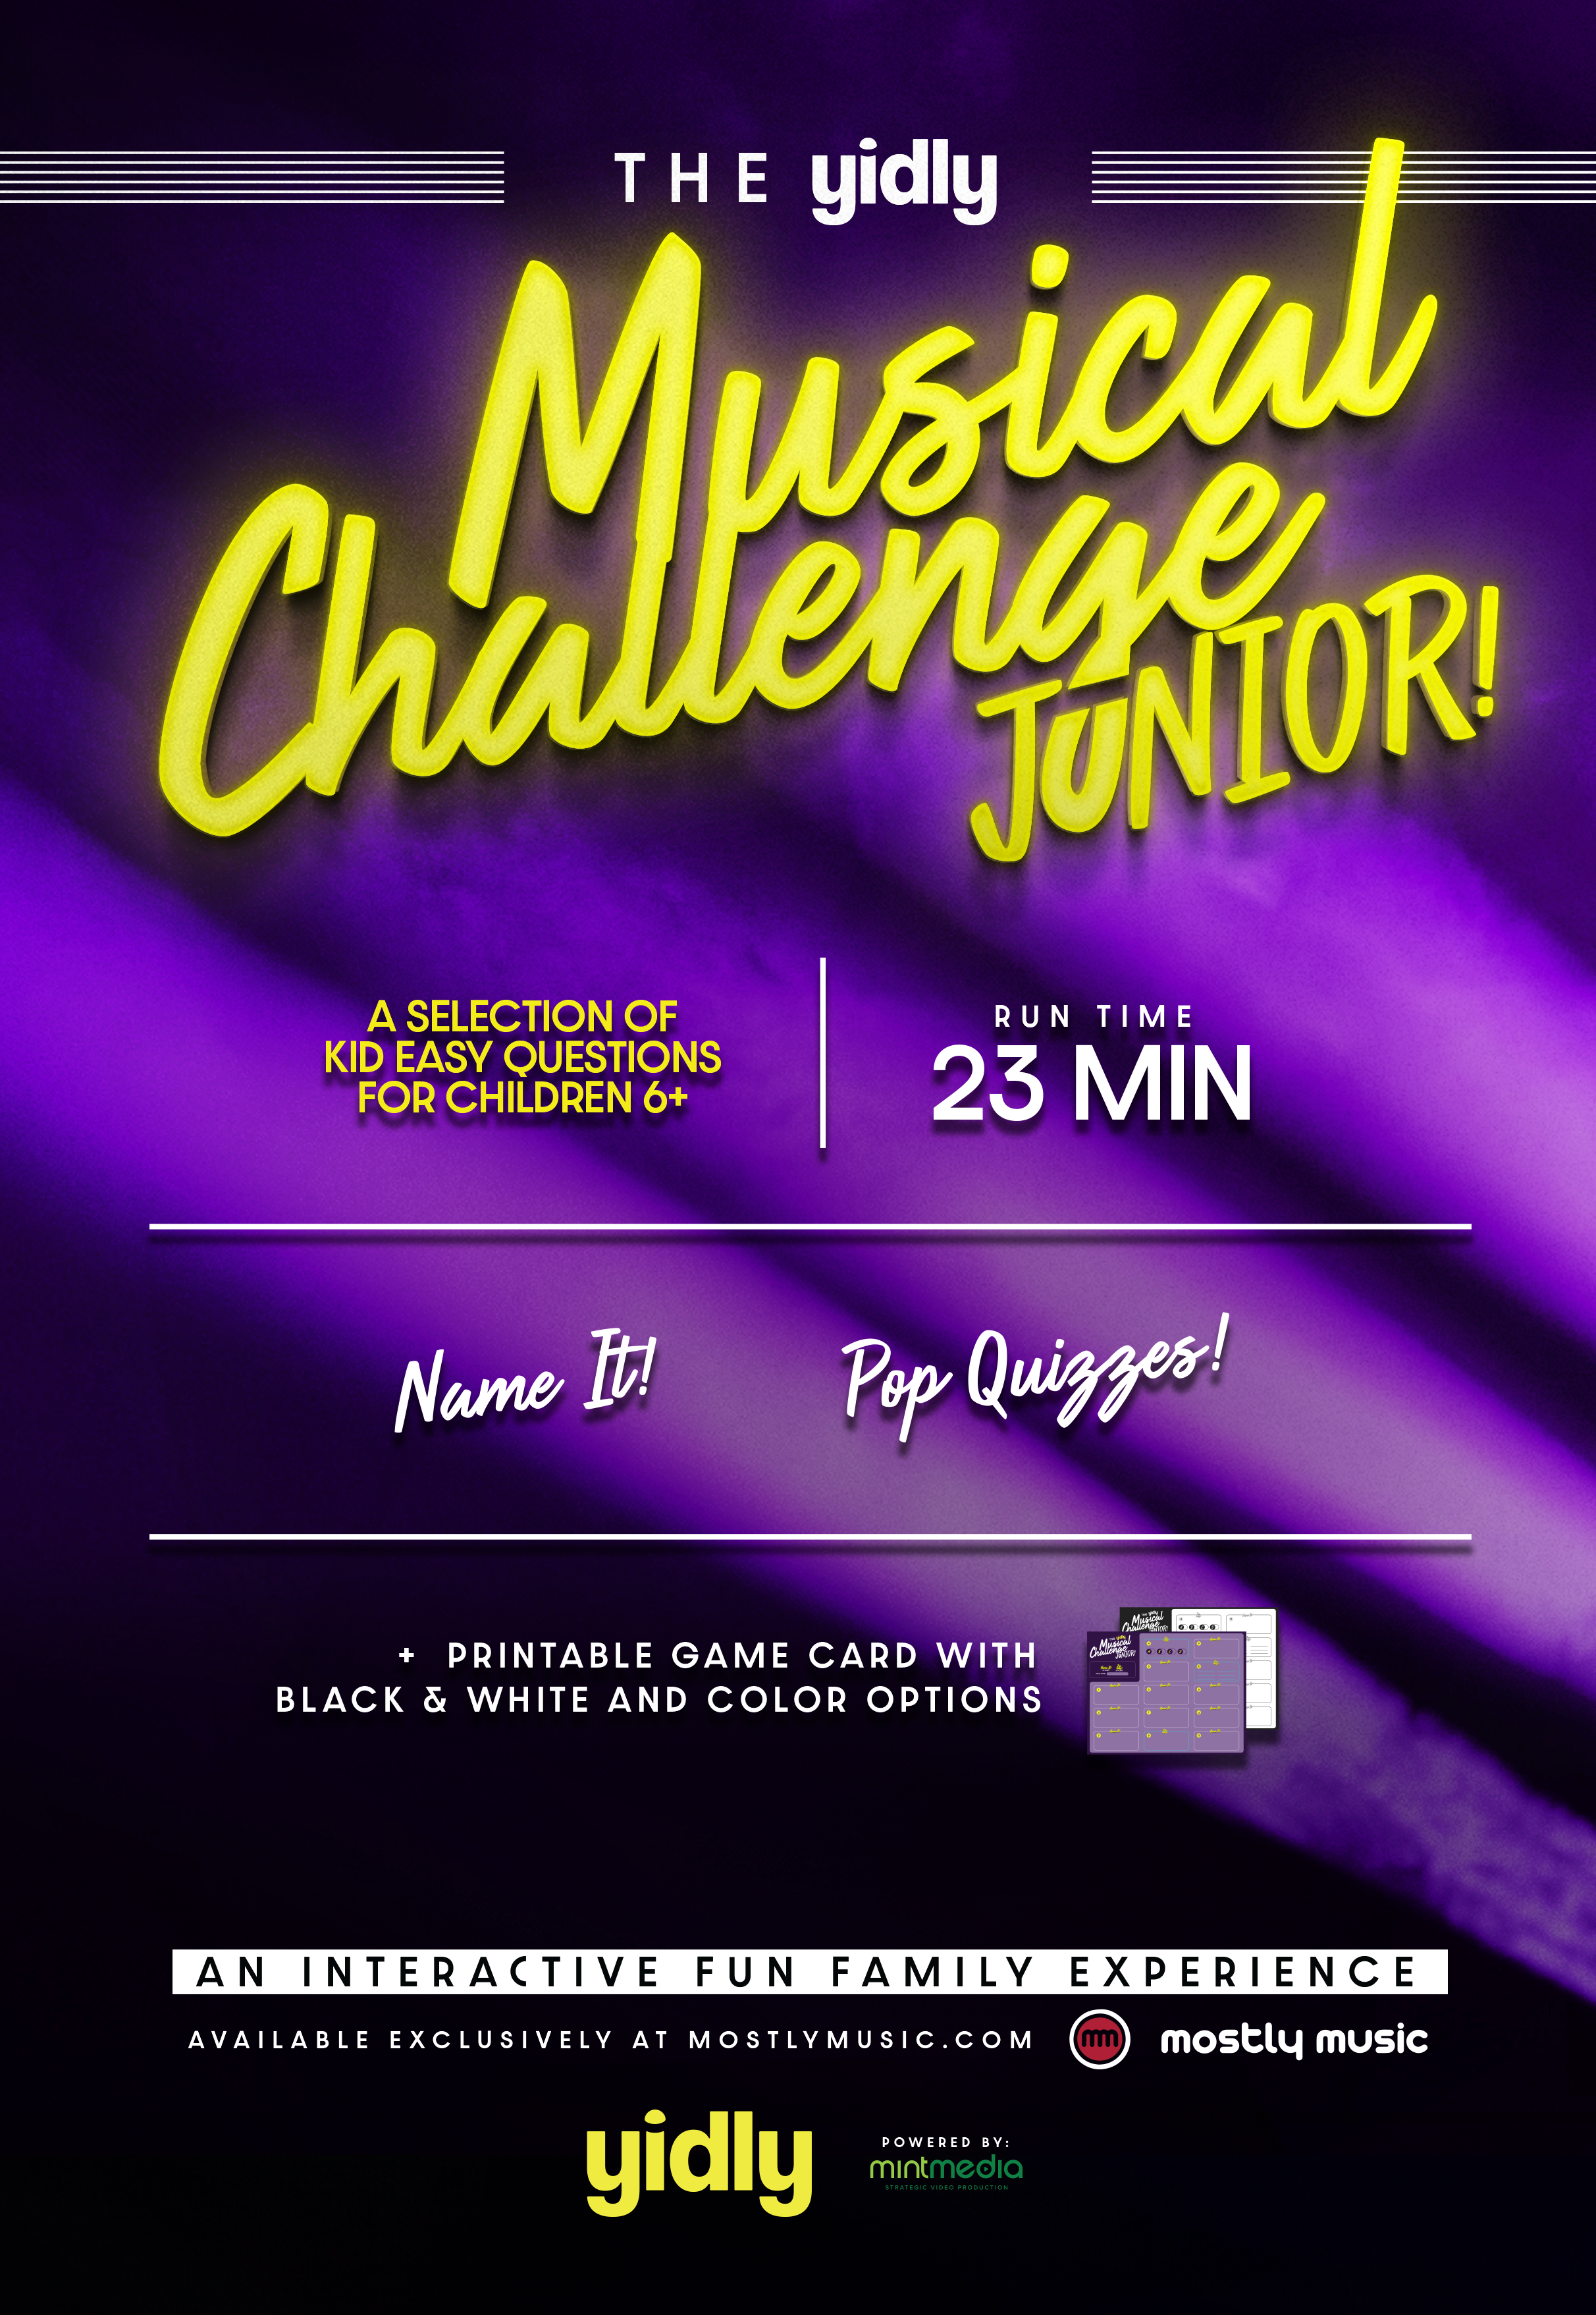 Yidly - Musical Challenge Junior (Interactive Video)